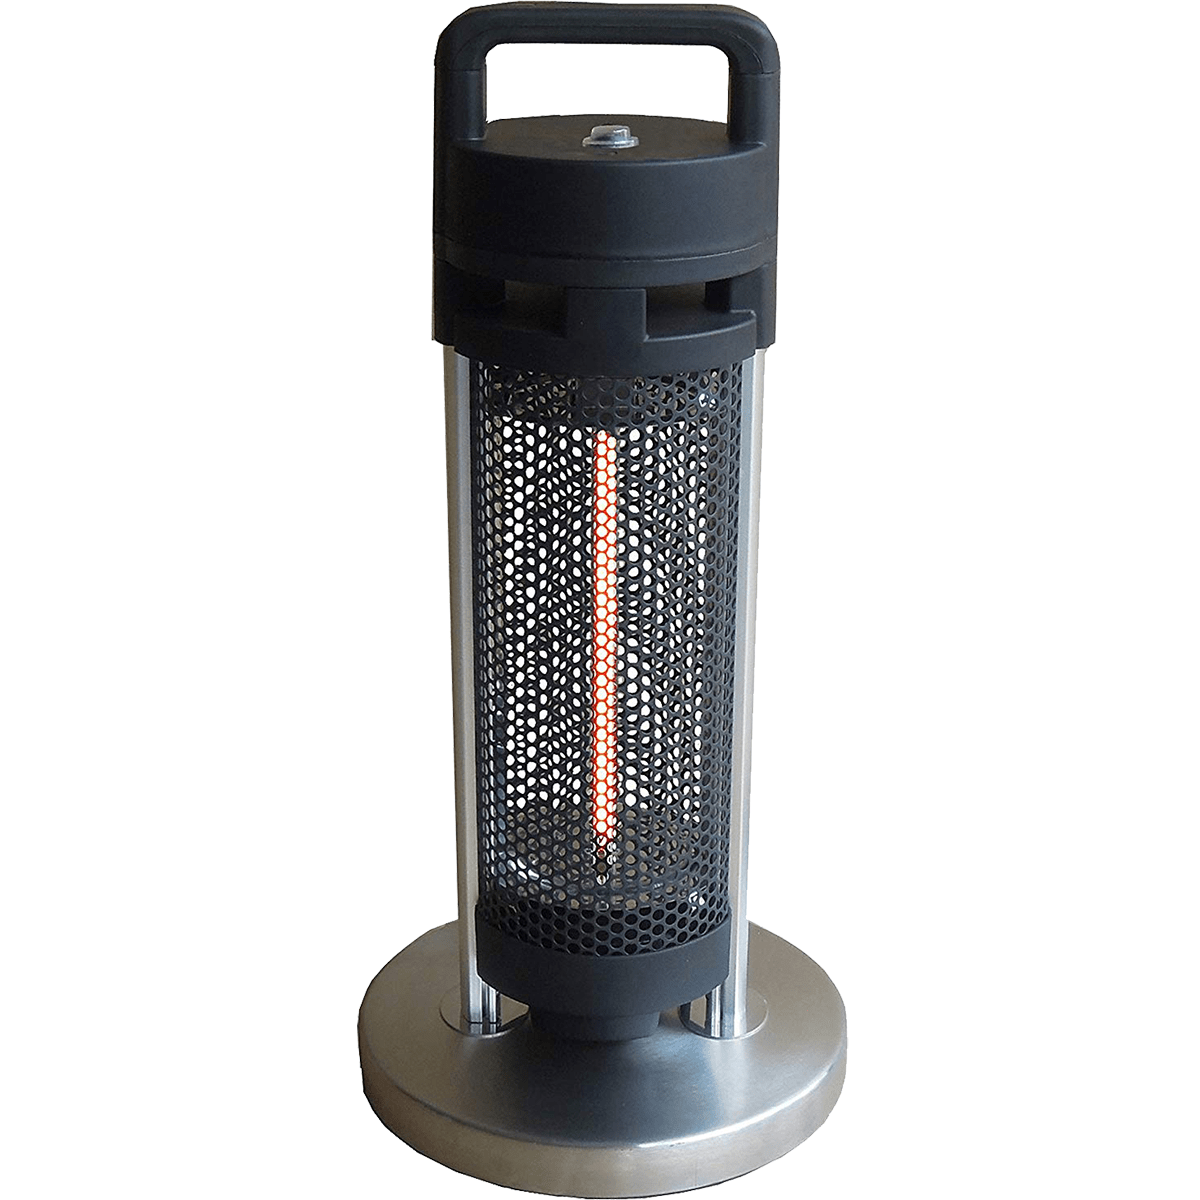 Ener-G+ Infrared Portable Under-Table Electric Heater